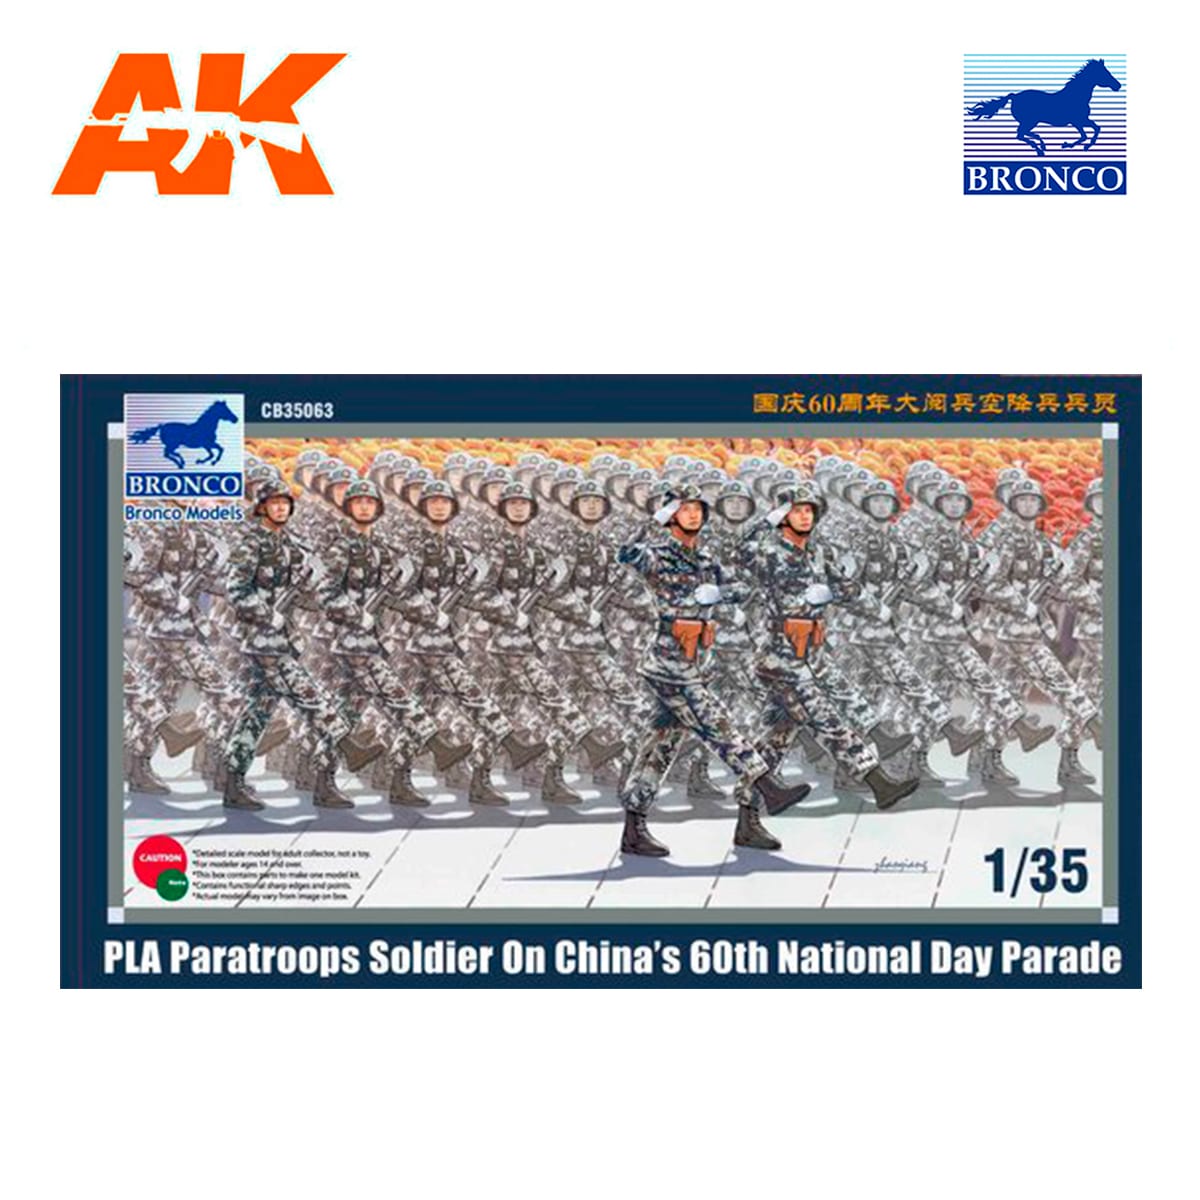 1/35 PLA Paratroops Soldier on China’s 60th National Day Parade